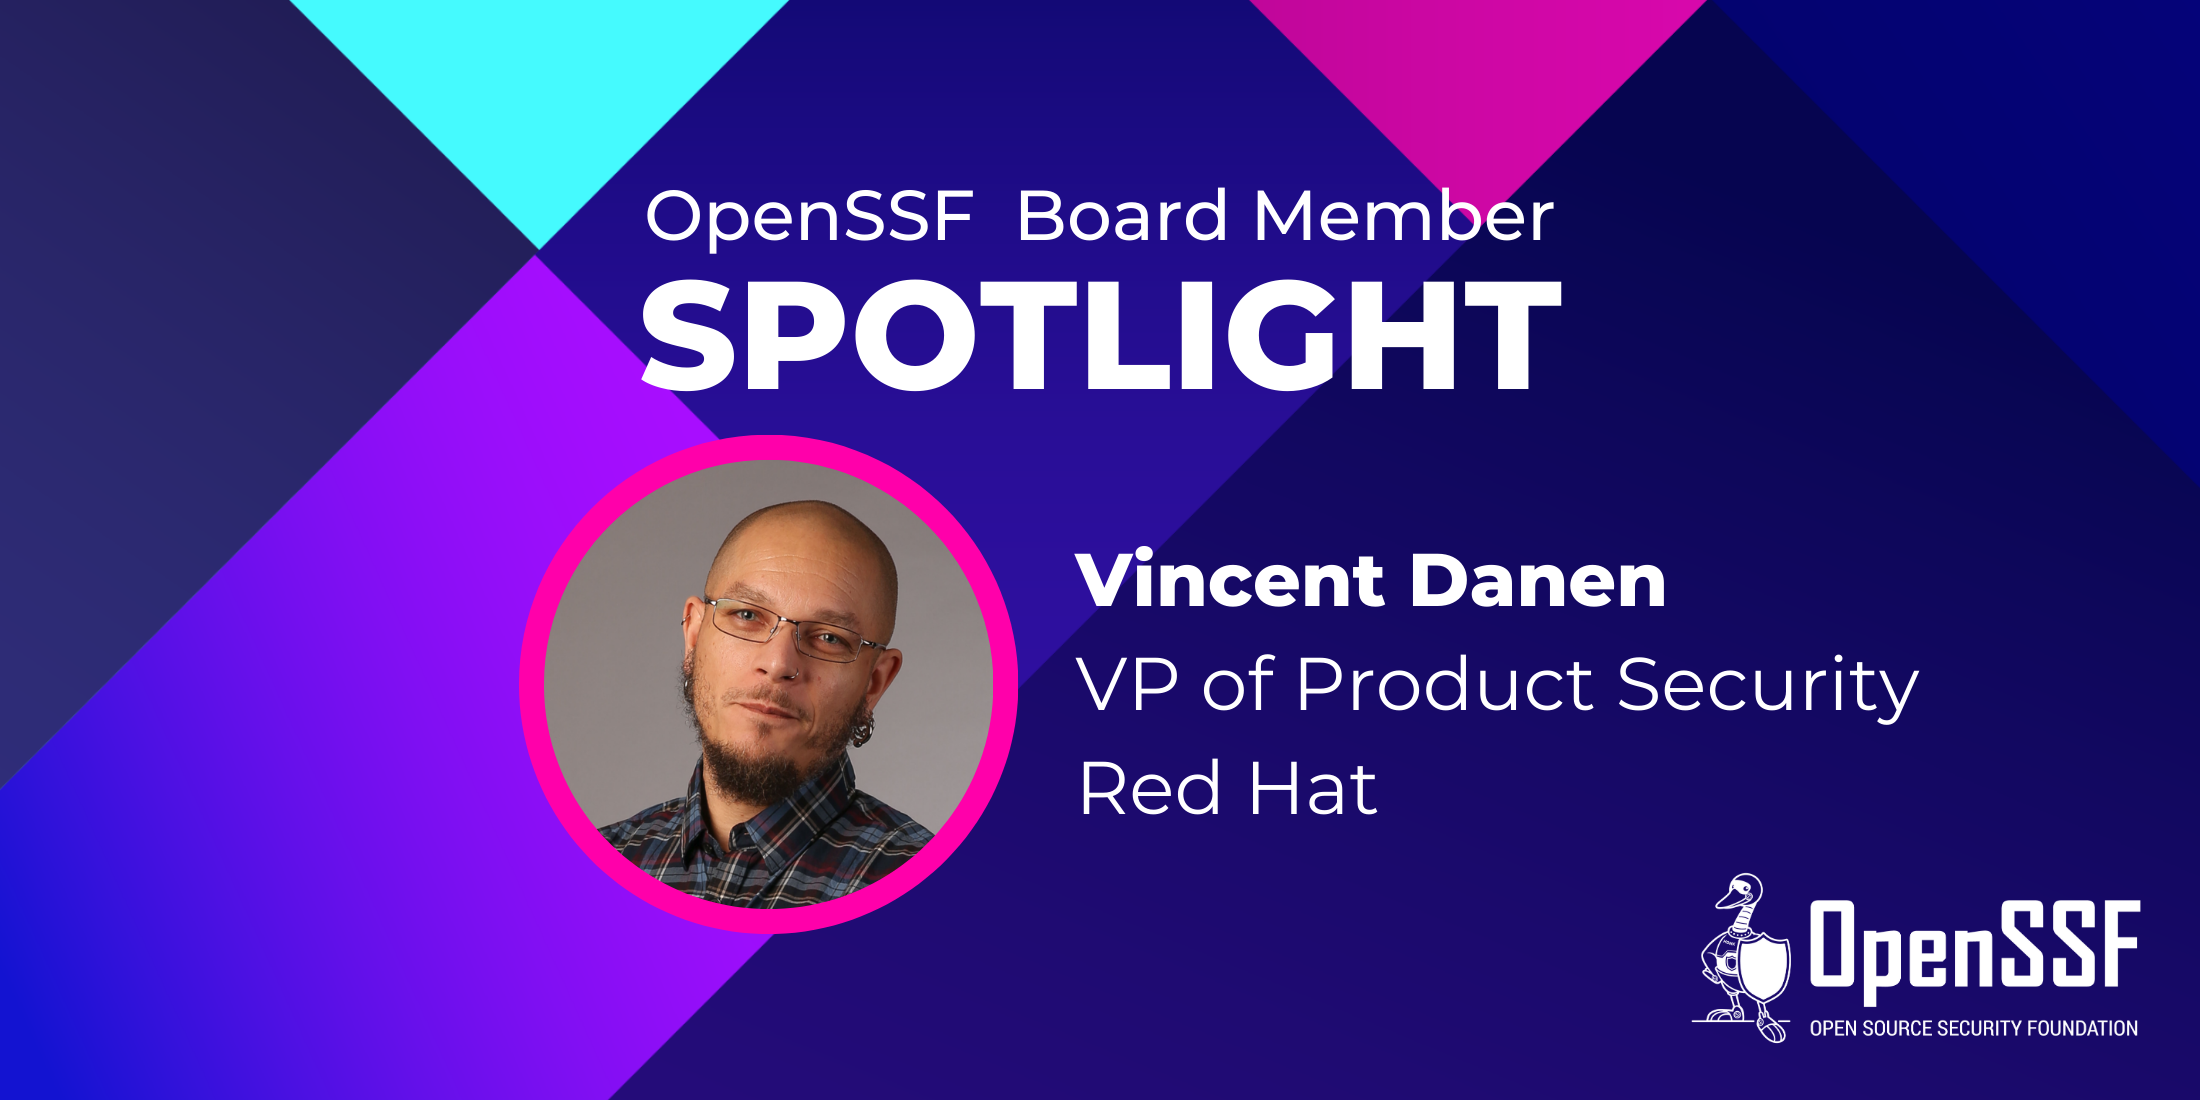 Spotlight on Vincent Danen, Vice President of Product Security, Red Hat